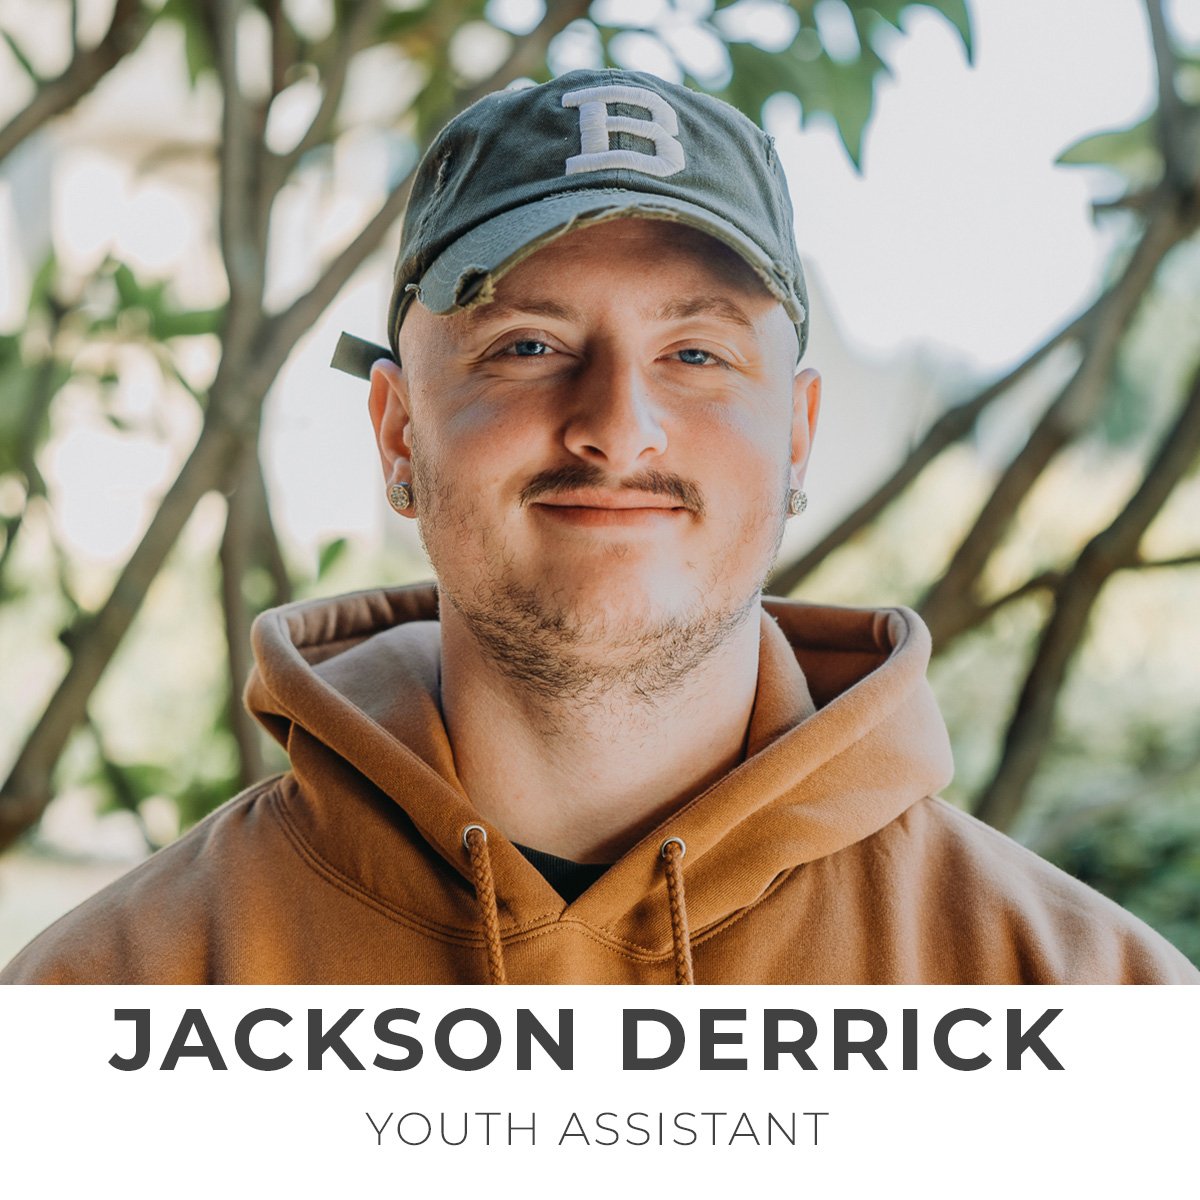 Jackson Derrick, Youth Assistant